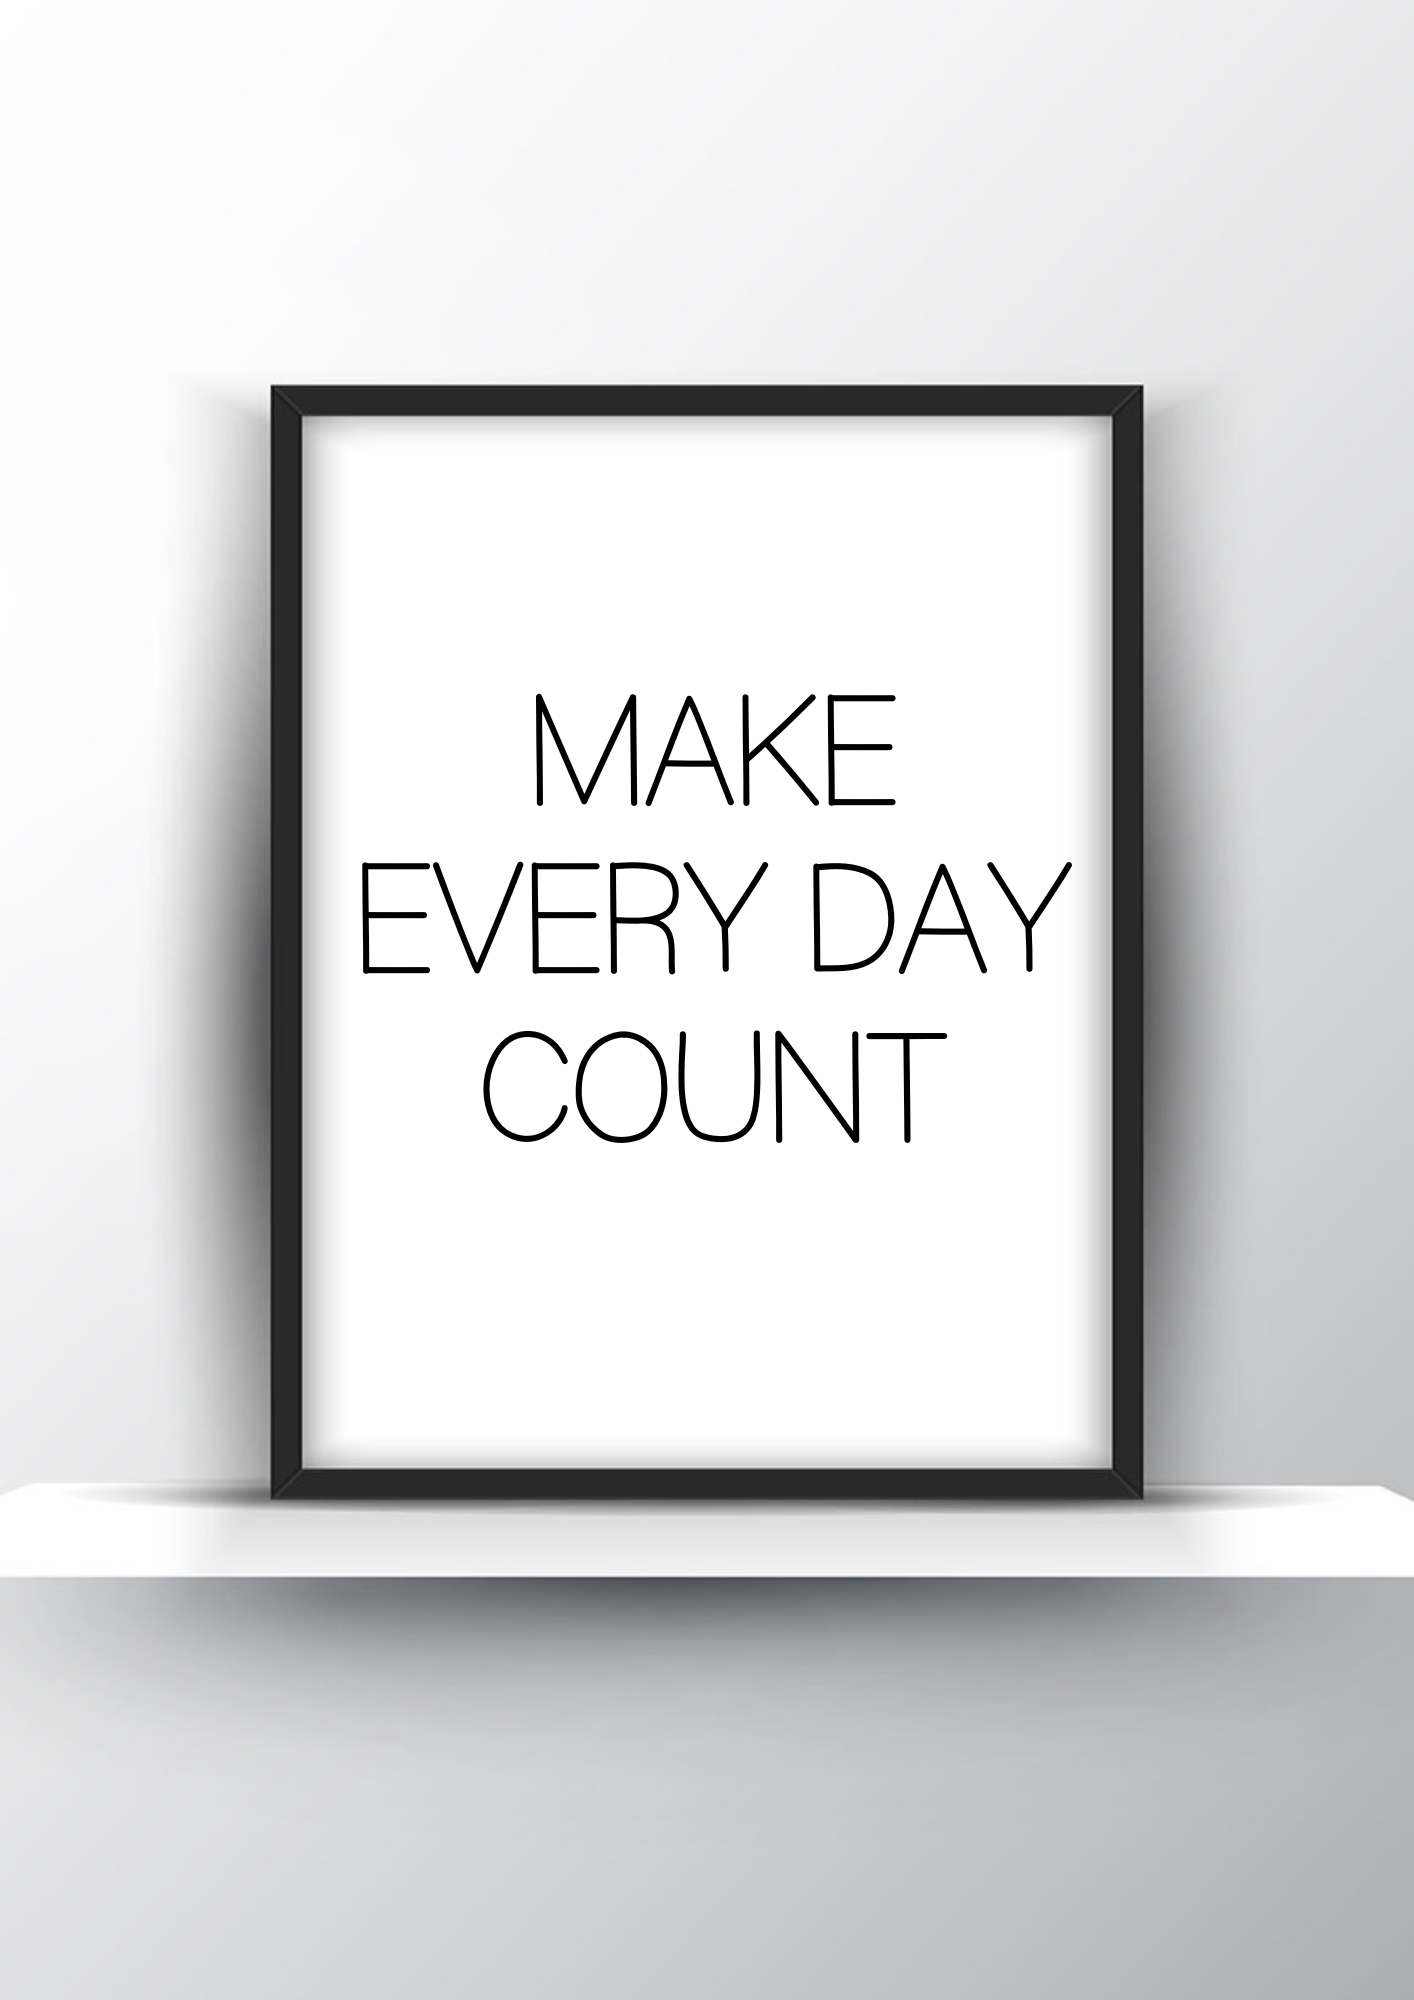 Make Every Day Count Printable Wall Art - Motivational Wall Art - Home Decor - Digital Download